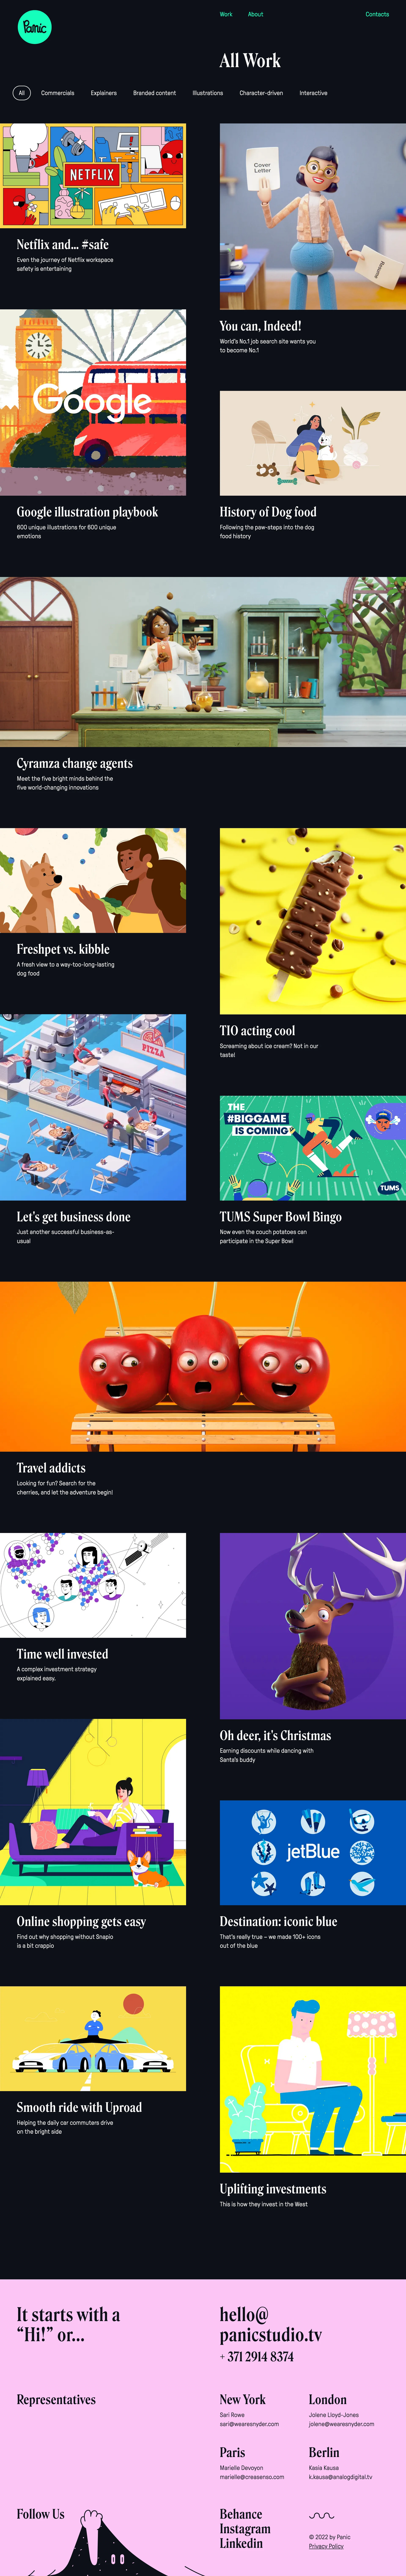 Panic Landing Page Example: Panic is an animation studio that makes unforgettable stories for you. We create ideas, video, illustrations and much more. Except panic.